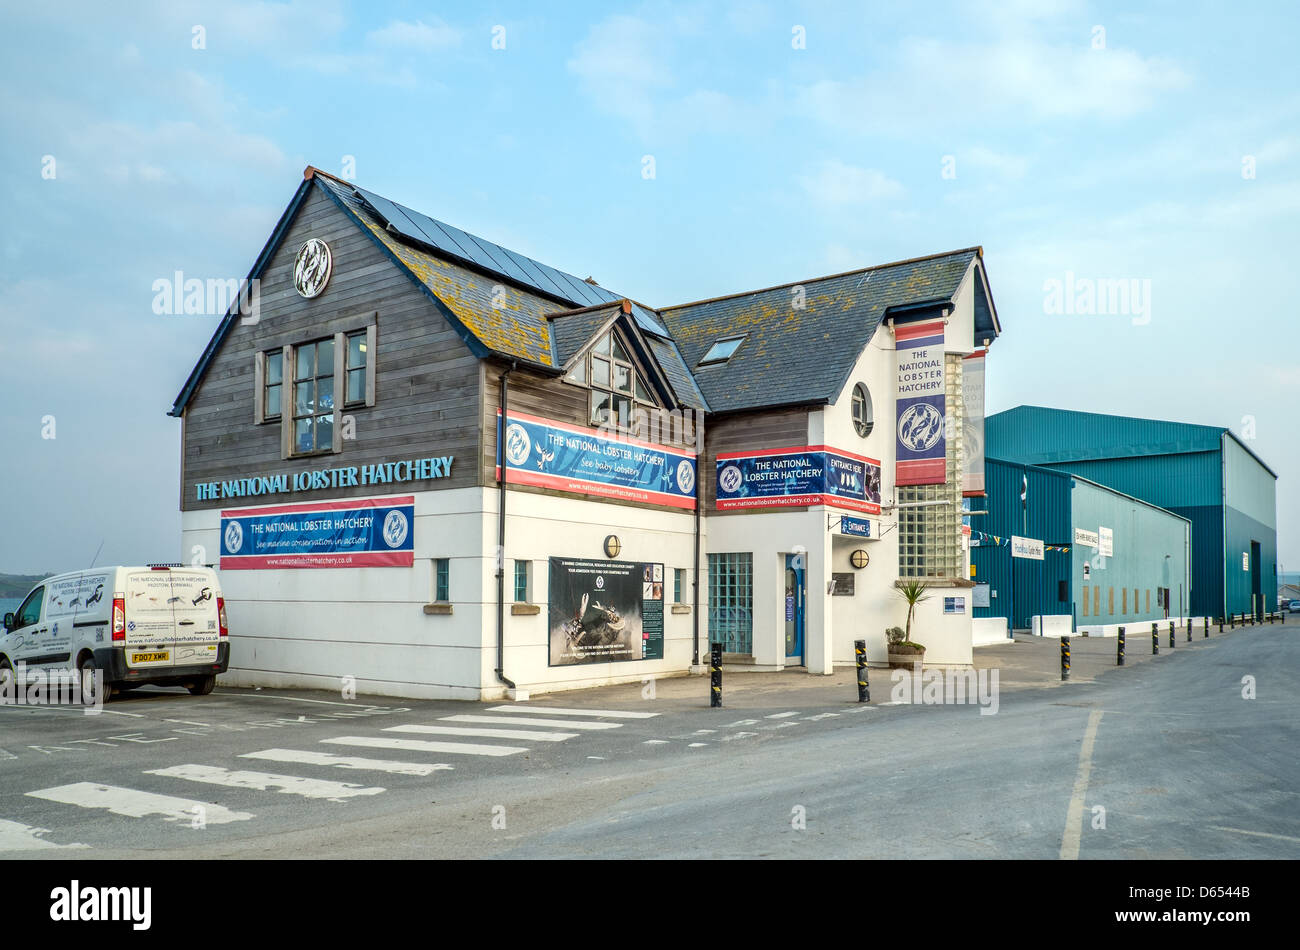 National Lobster Hatchery, Padstow, Cornwall Foto Stock